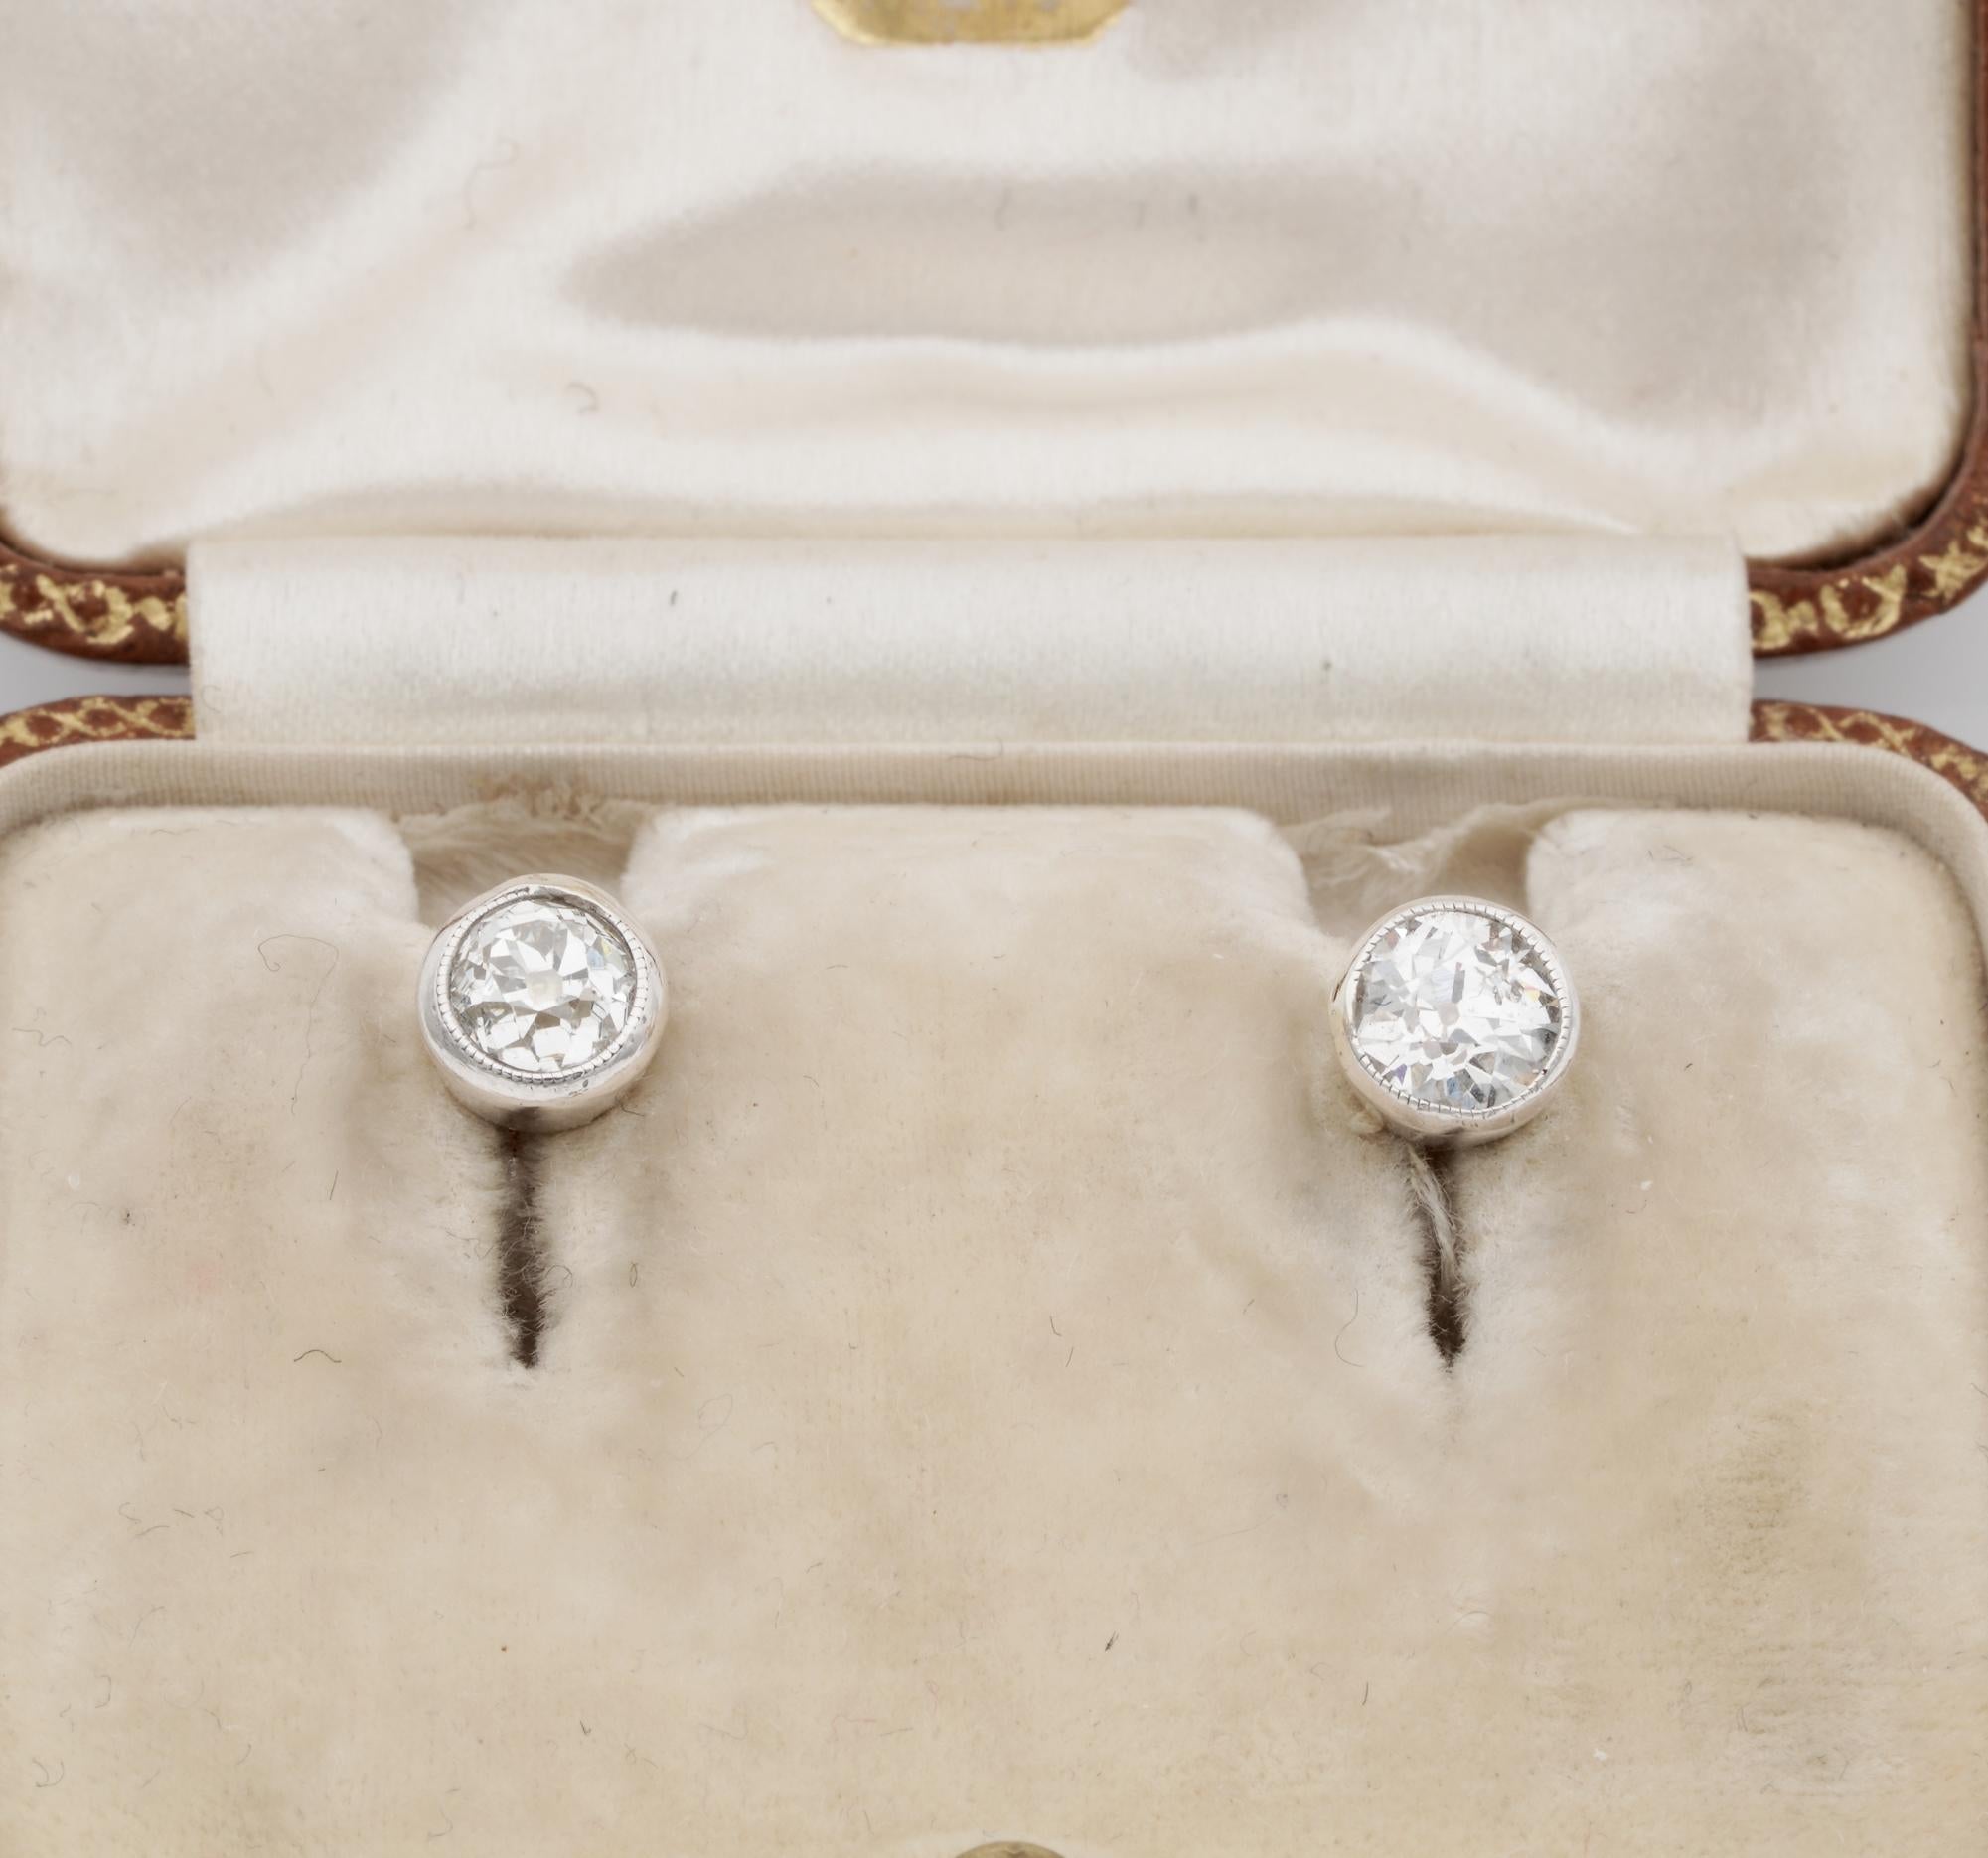 Catch the Light

Beautiful antique Victorian period Diamond studs, two points on ears attracting and projecting light in the special way only old mine cut Diamonds do
Set in a solid 18 Kt gold topped by silver rub over mount, 1900 ca
Holding two